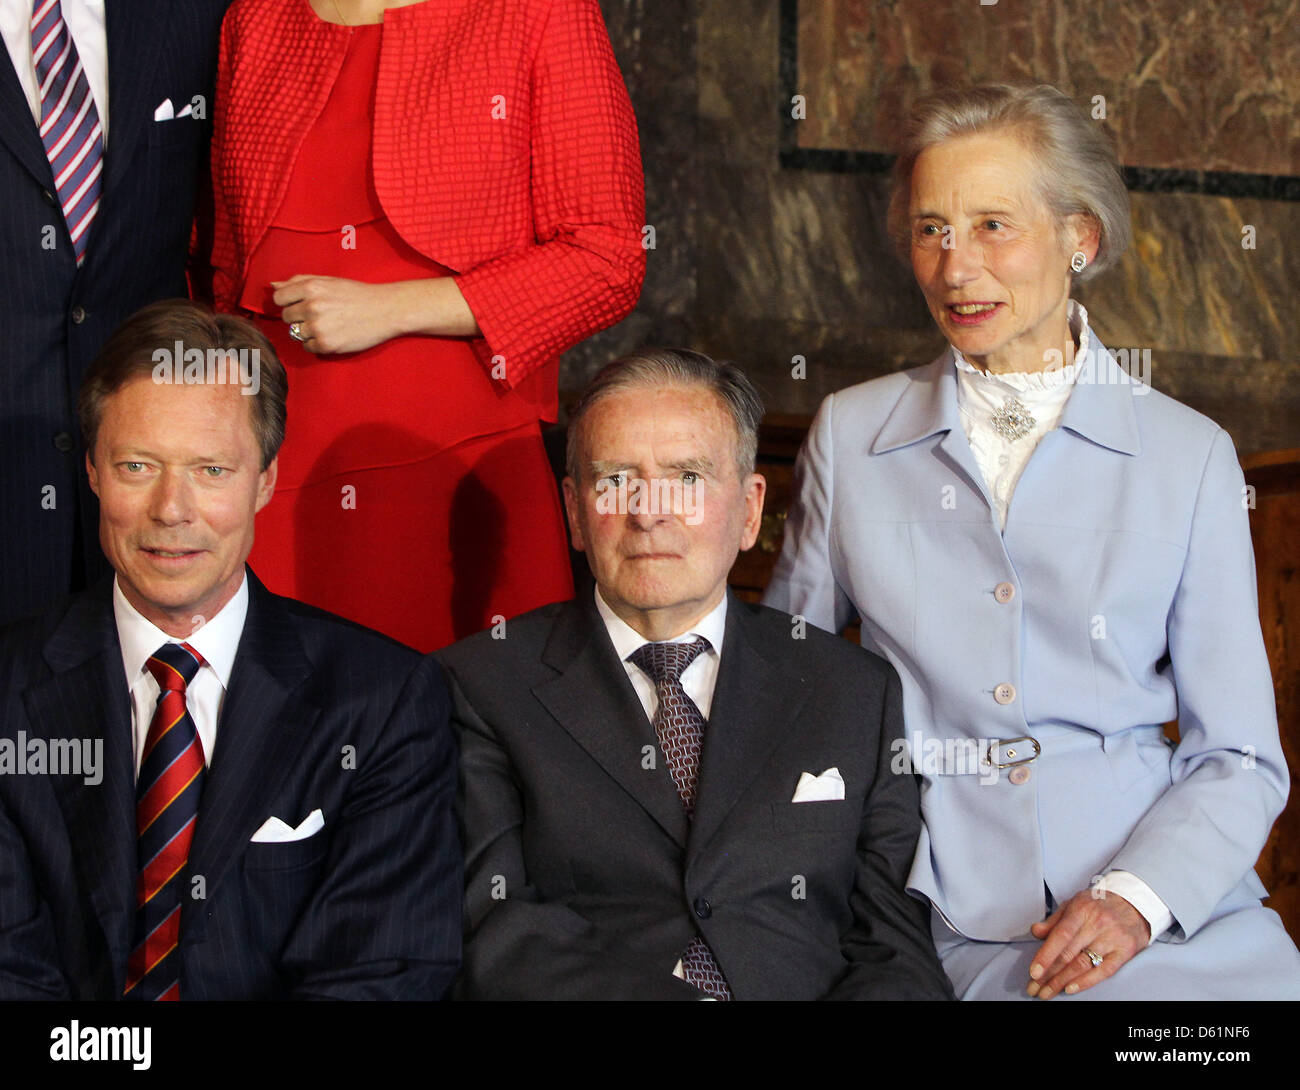 Grand Duke Henri of Luxembourg and Count Philippe and Countess Alix de Lannoy (L-R) at Chateau de Berg in Luxembourg, 27 April 2012. Photo: Patrick van Katwijk/ NETHERLAND OUT Stock Photo